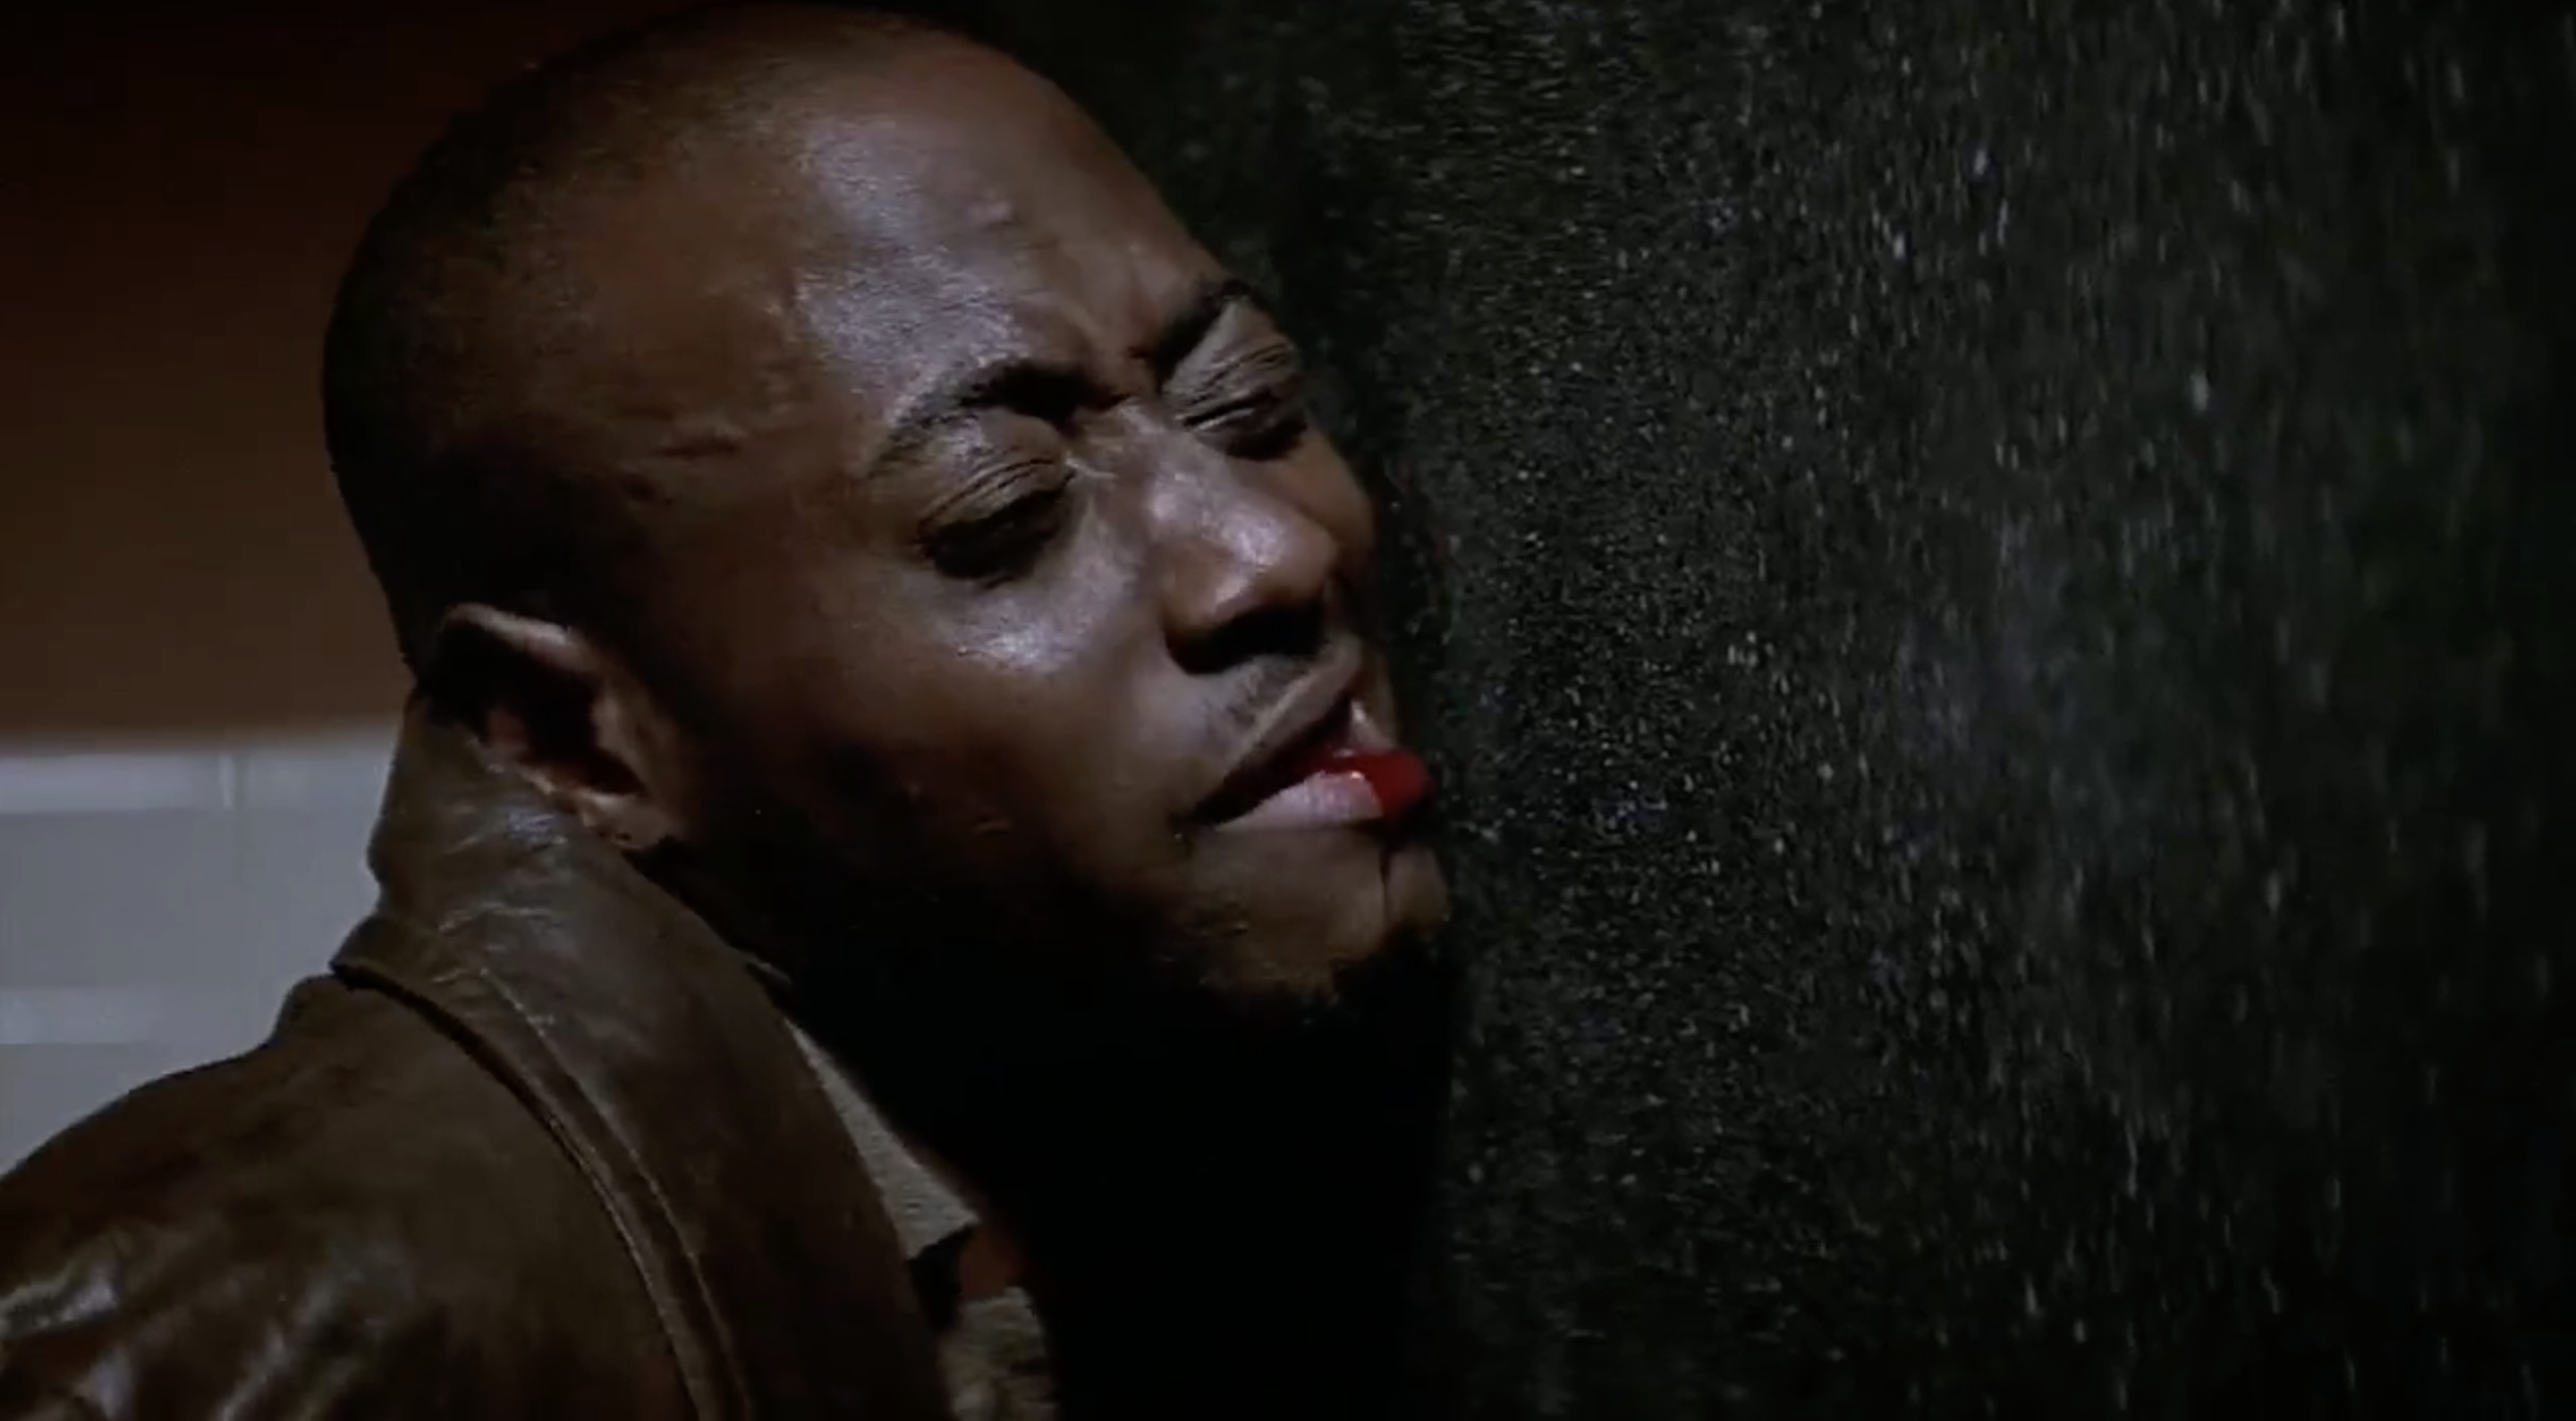 Omar Epps stabbed through a bathroom stall in the face